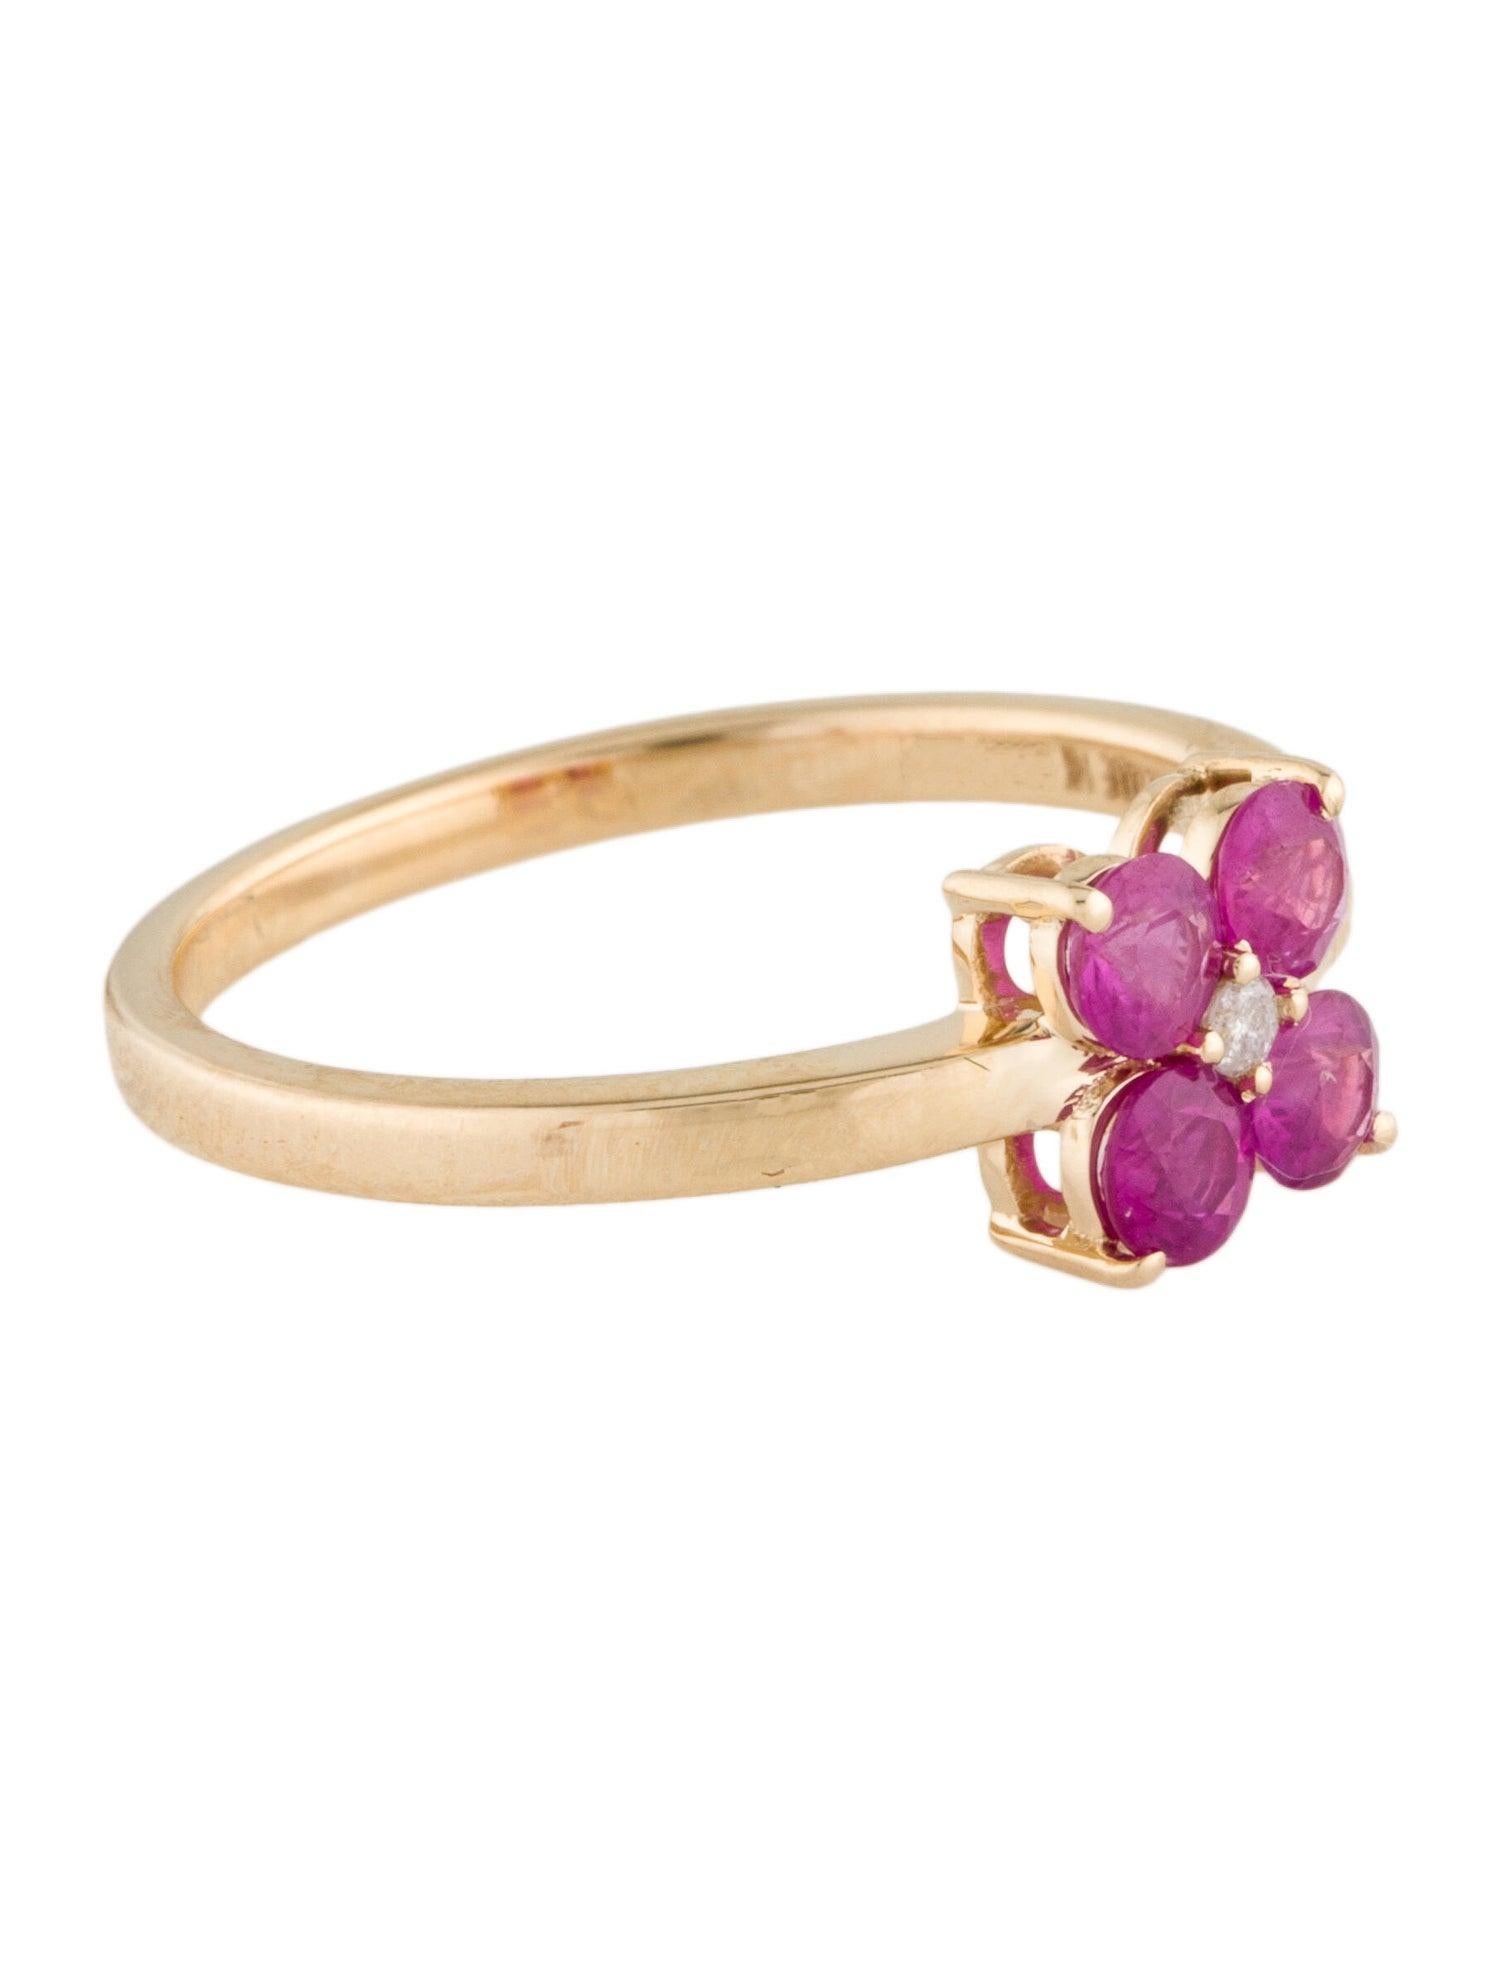 Indulge in the timeless allure of our Blooms of Passion collection with this exquisite Ruby and Diamond 14k Gold Ring by Jeweltique. Meticulously crafted with a dedication to quality that spans over 50 years, this piece is a testament to our brand's